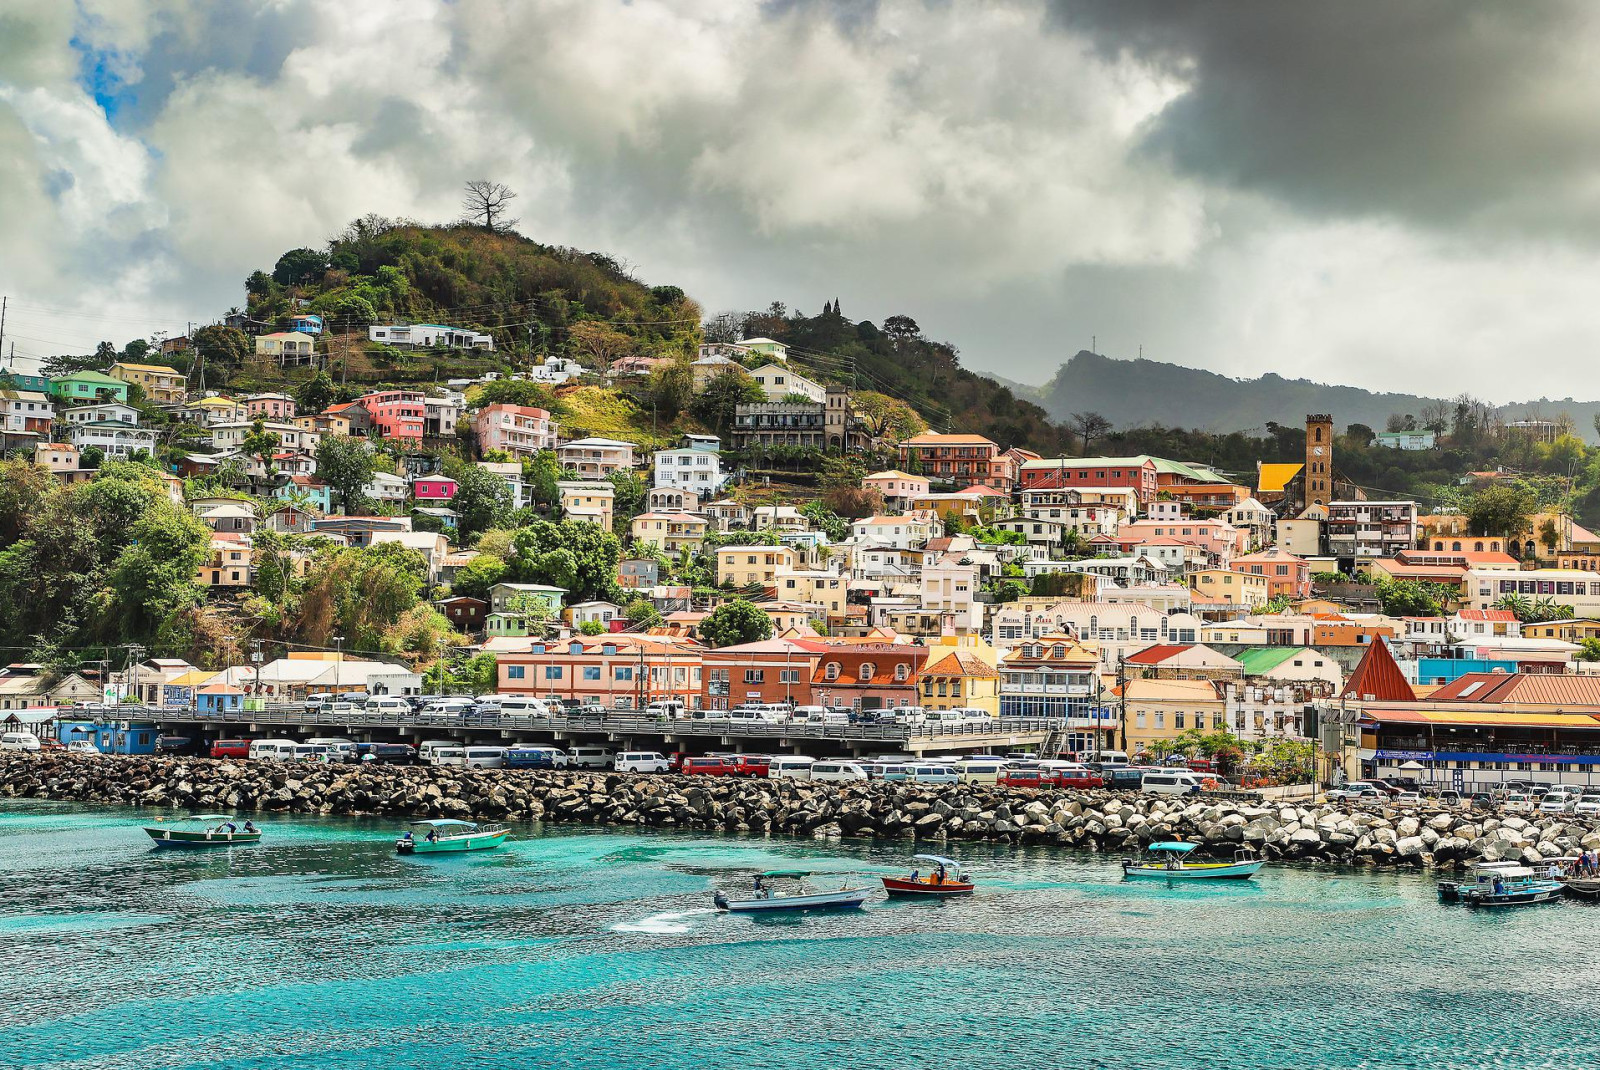 Colorful buildings with the ocean in the foreground and green hills in background in Grenada